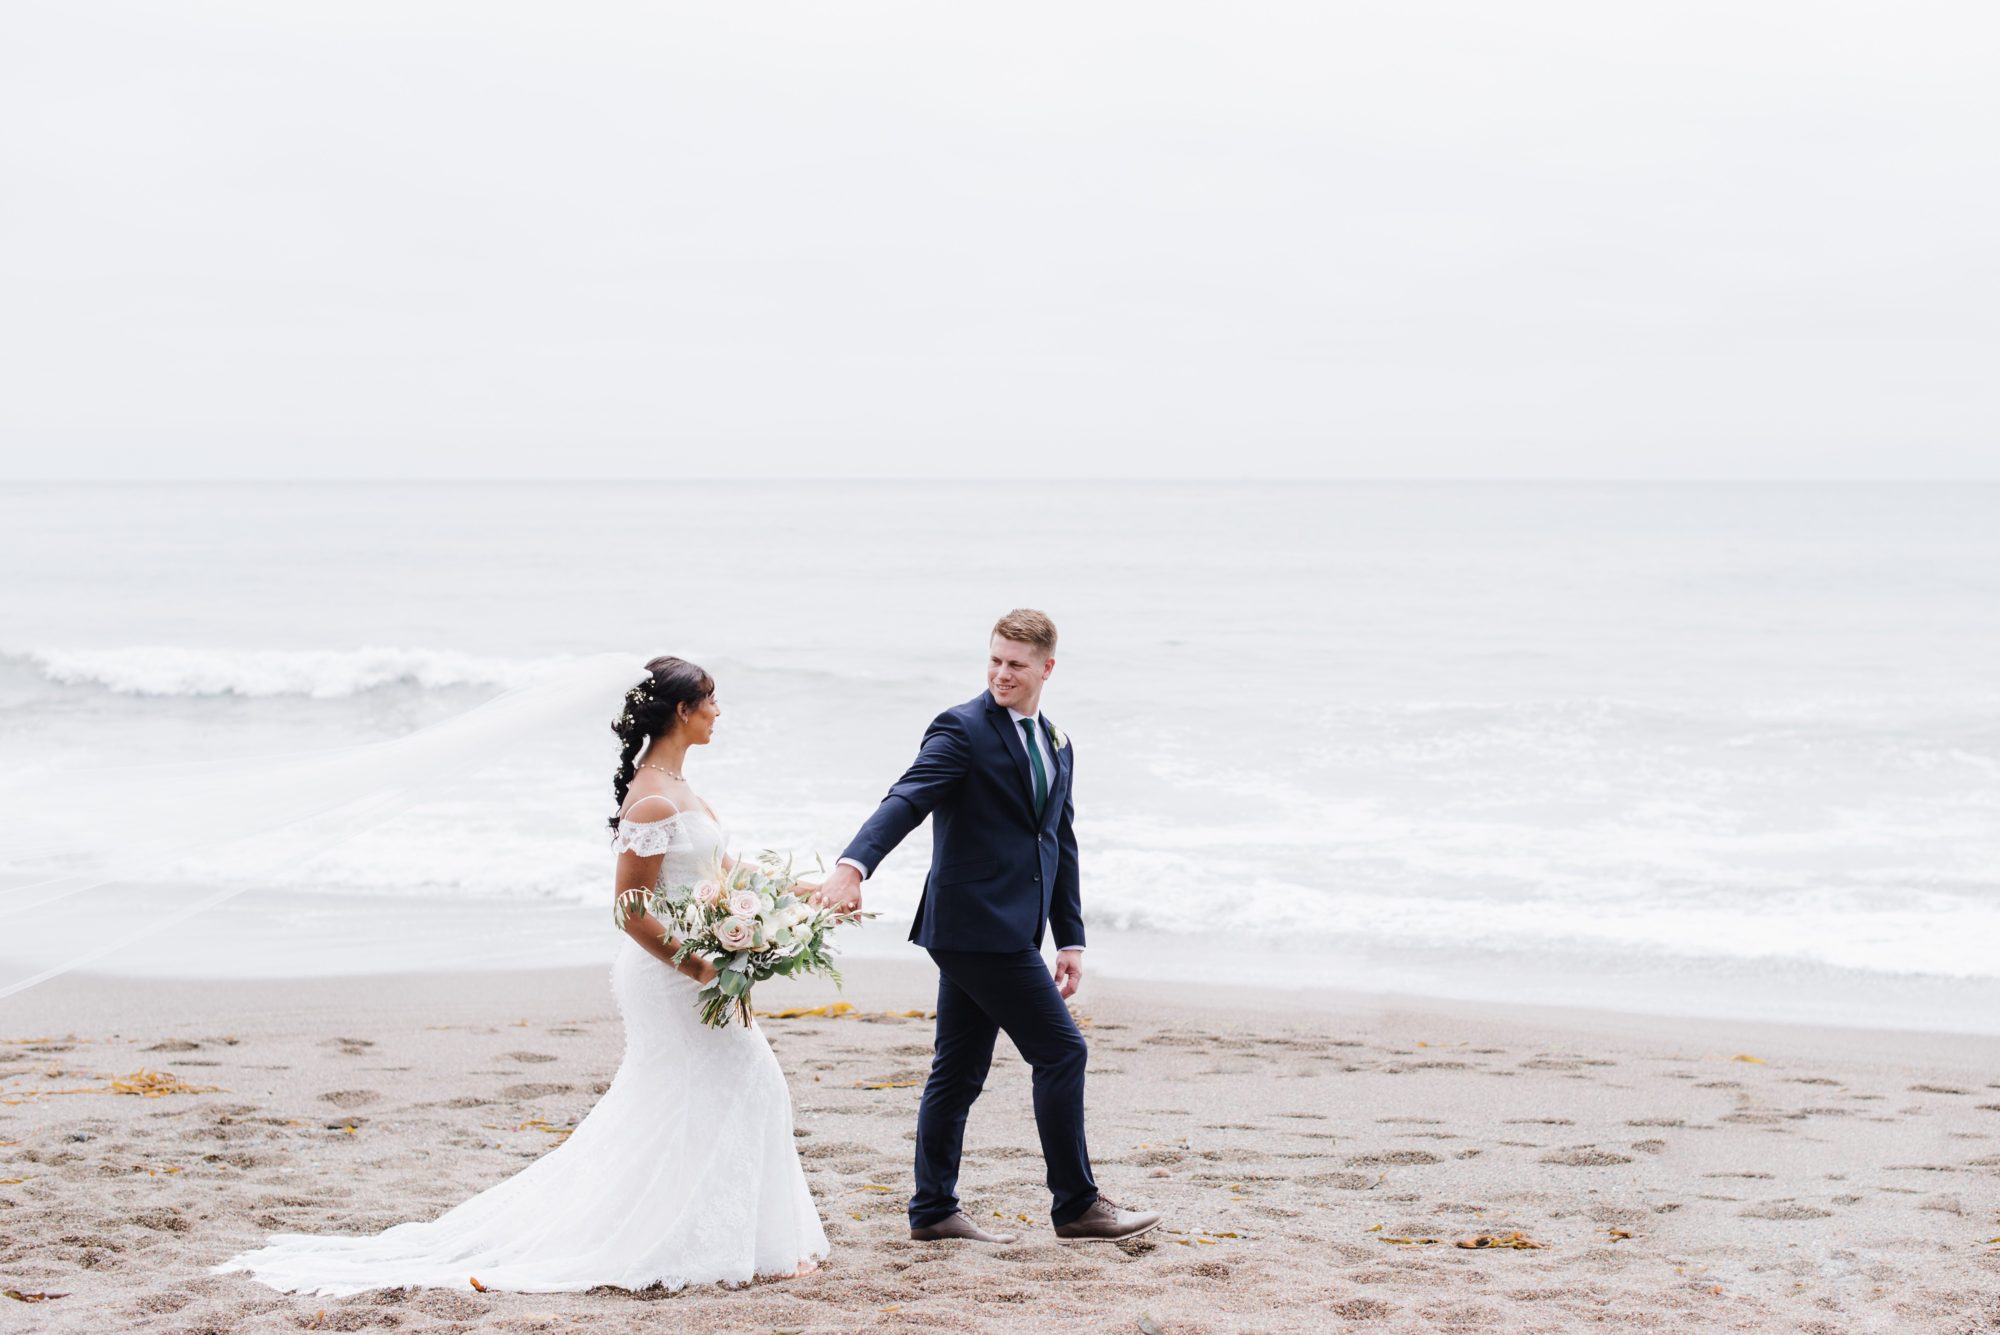 Beautiful California beach wedding photo. Bride and groom are walking next to the ocean. Bride is wearing a wedding dress and holding a bouquet.